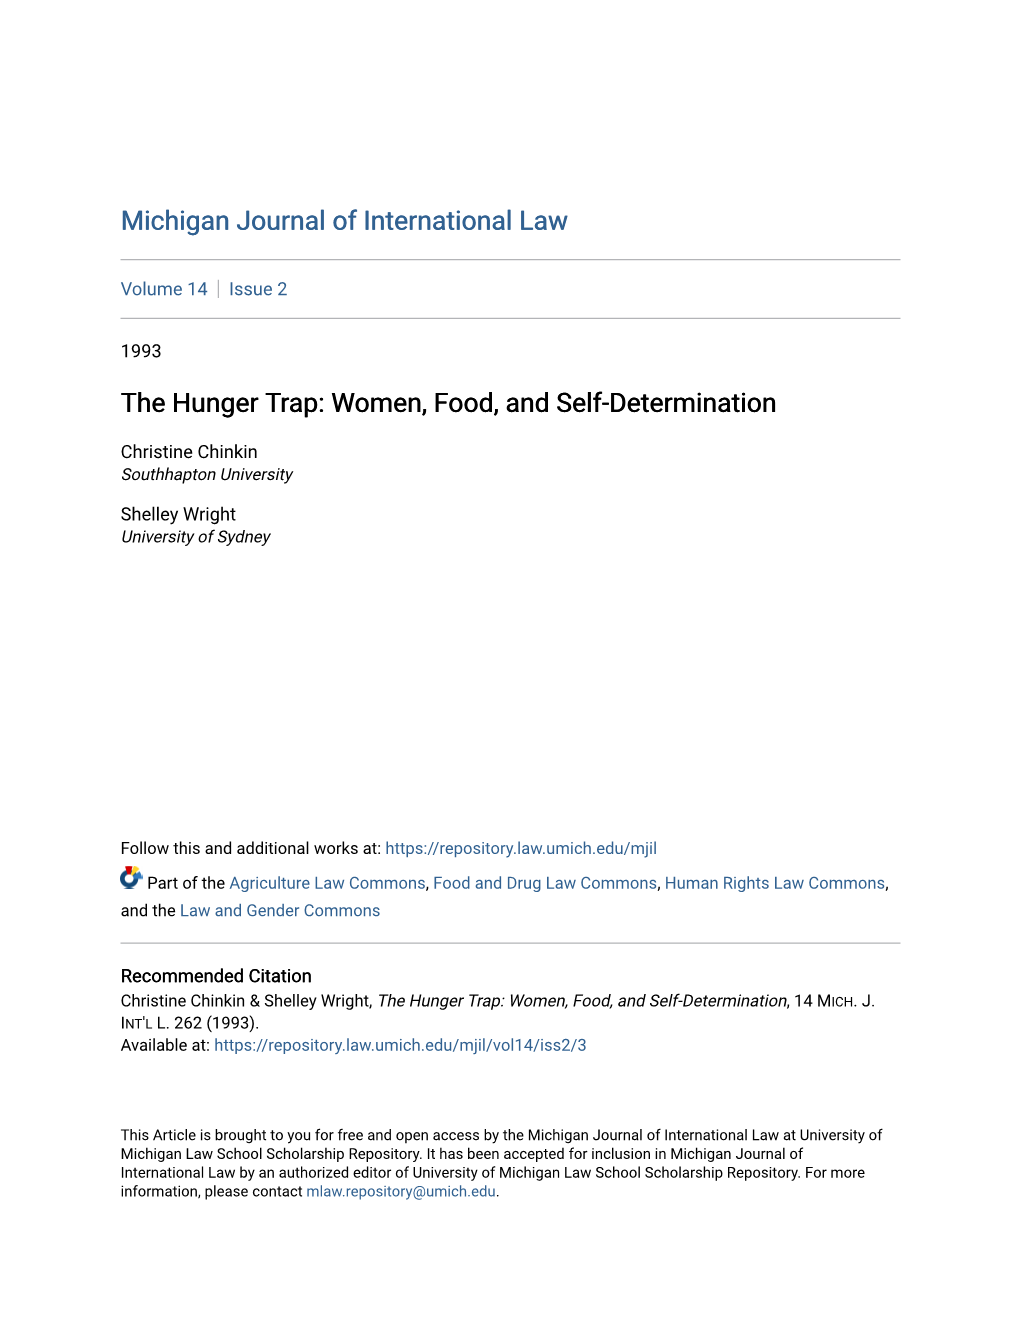 The Hunger Trap: Women, Food, and Self-Determination